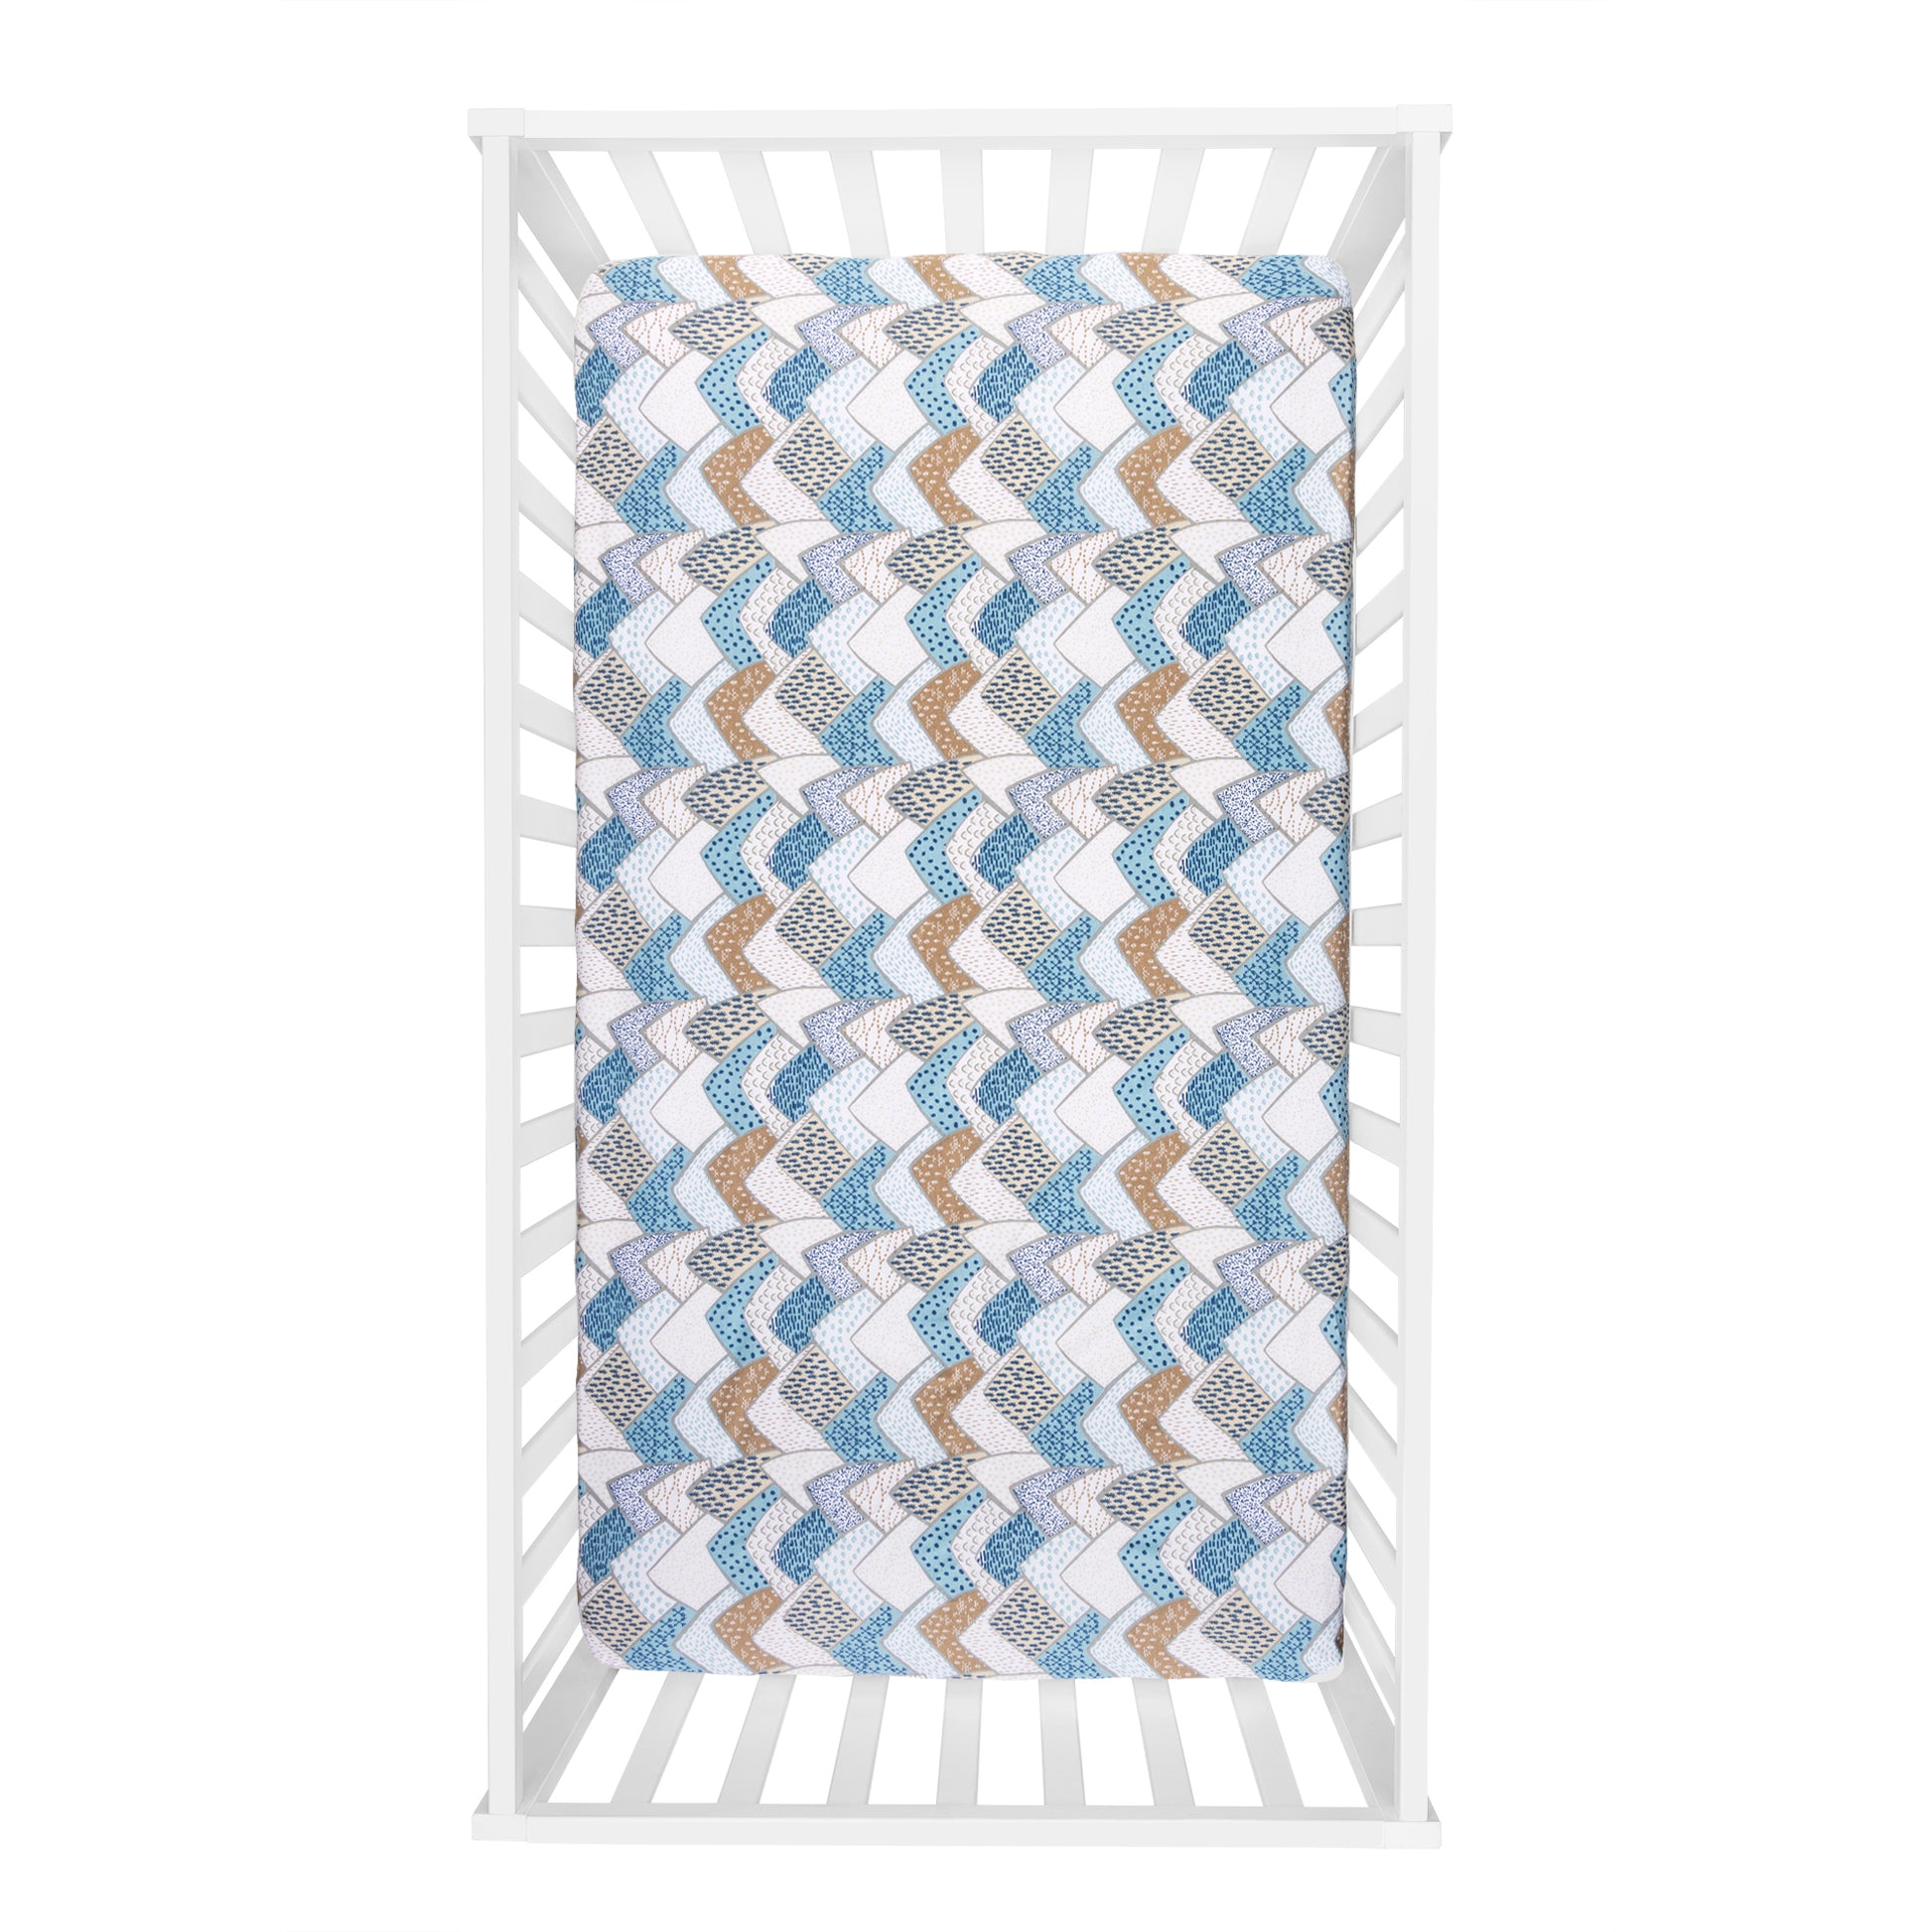  Big Sky 4 Piece Crib Bedding Set- Overhead view of crib sheet that features a multi-pattern mountain print.